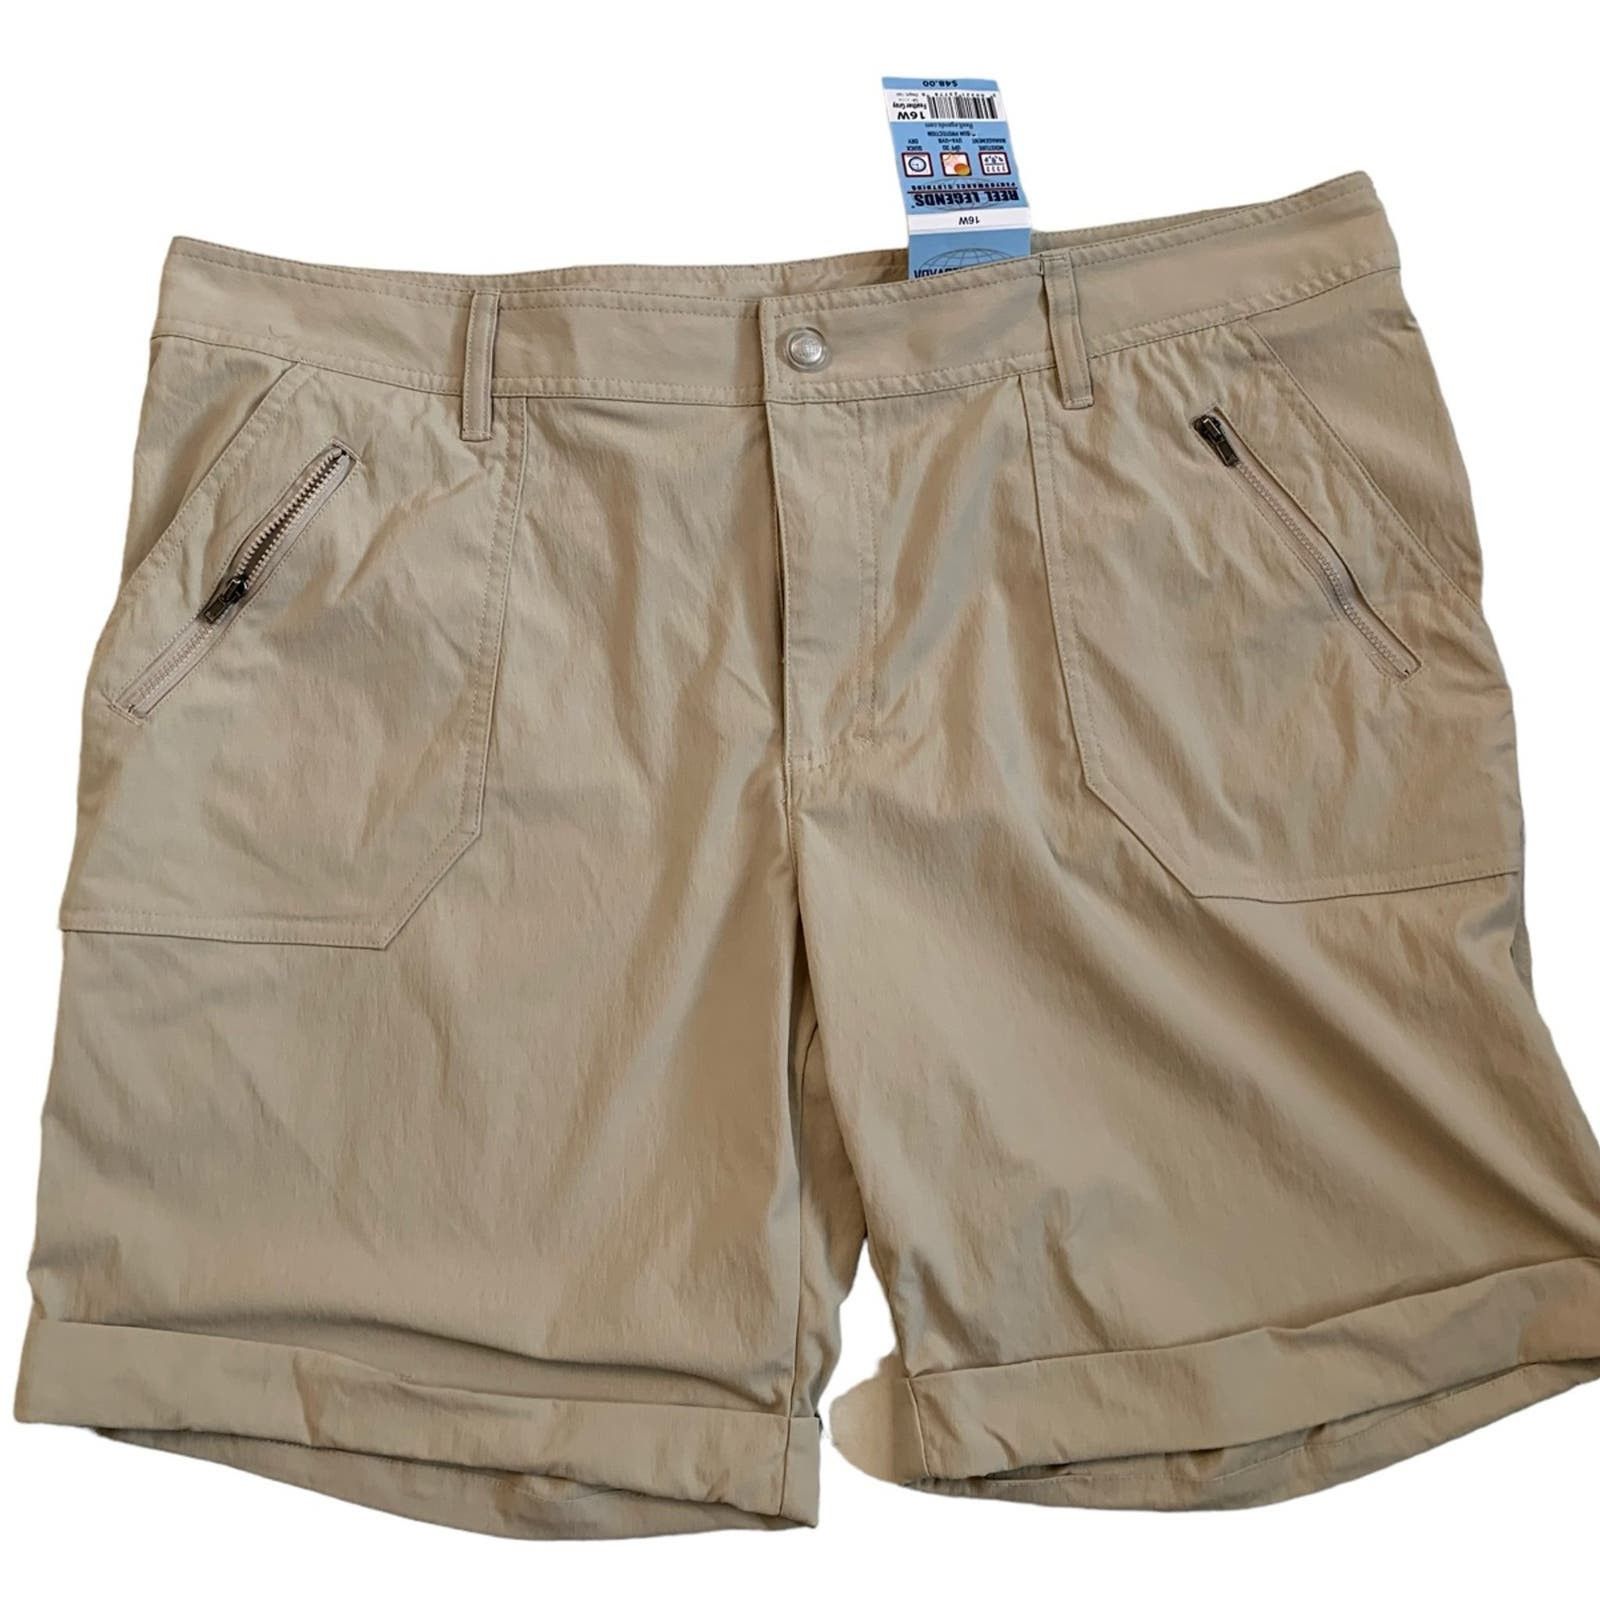 Reel Legends Mens Solid Tarpon Quick Dry 7 in. Cargo Shorts Small